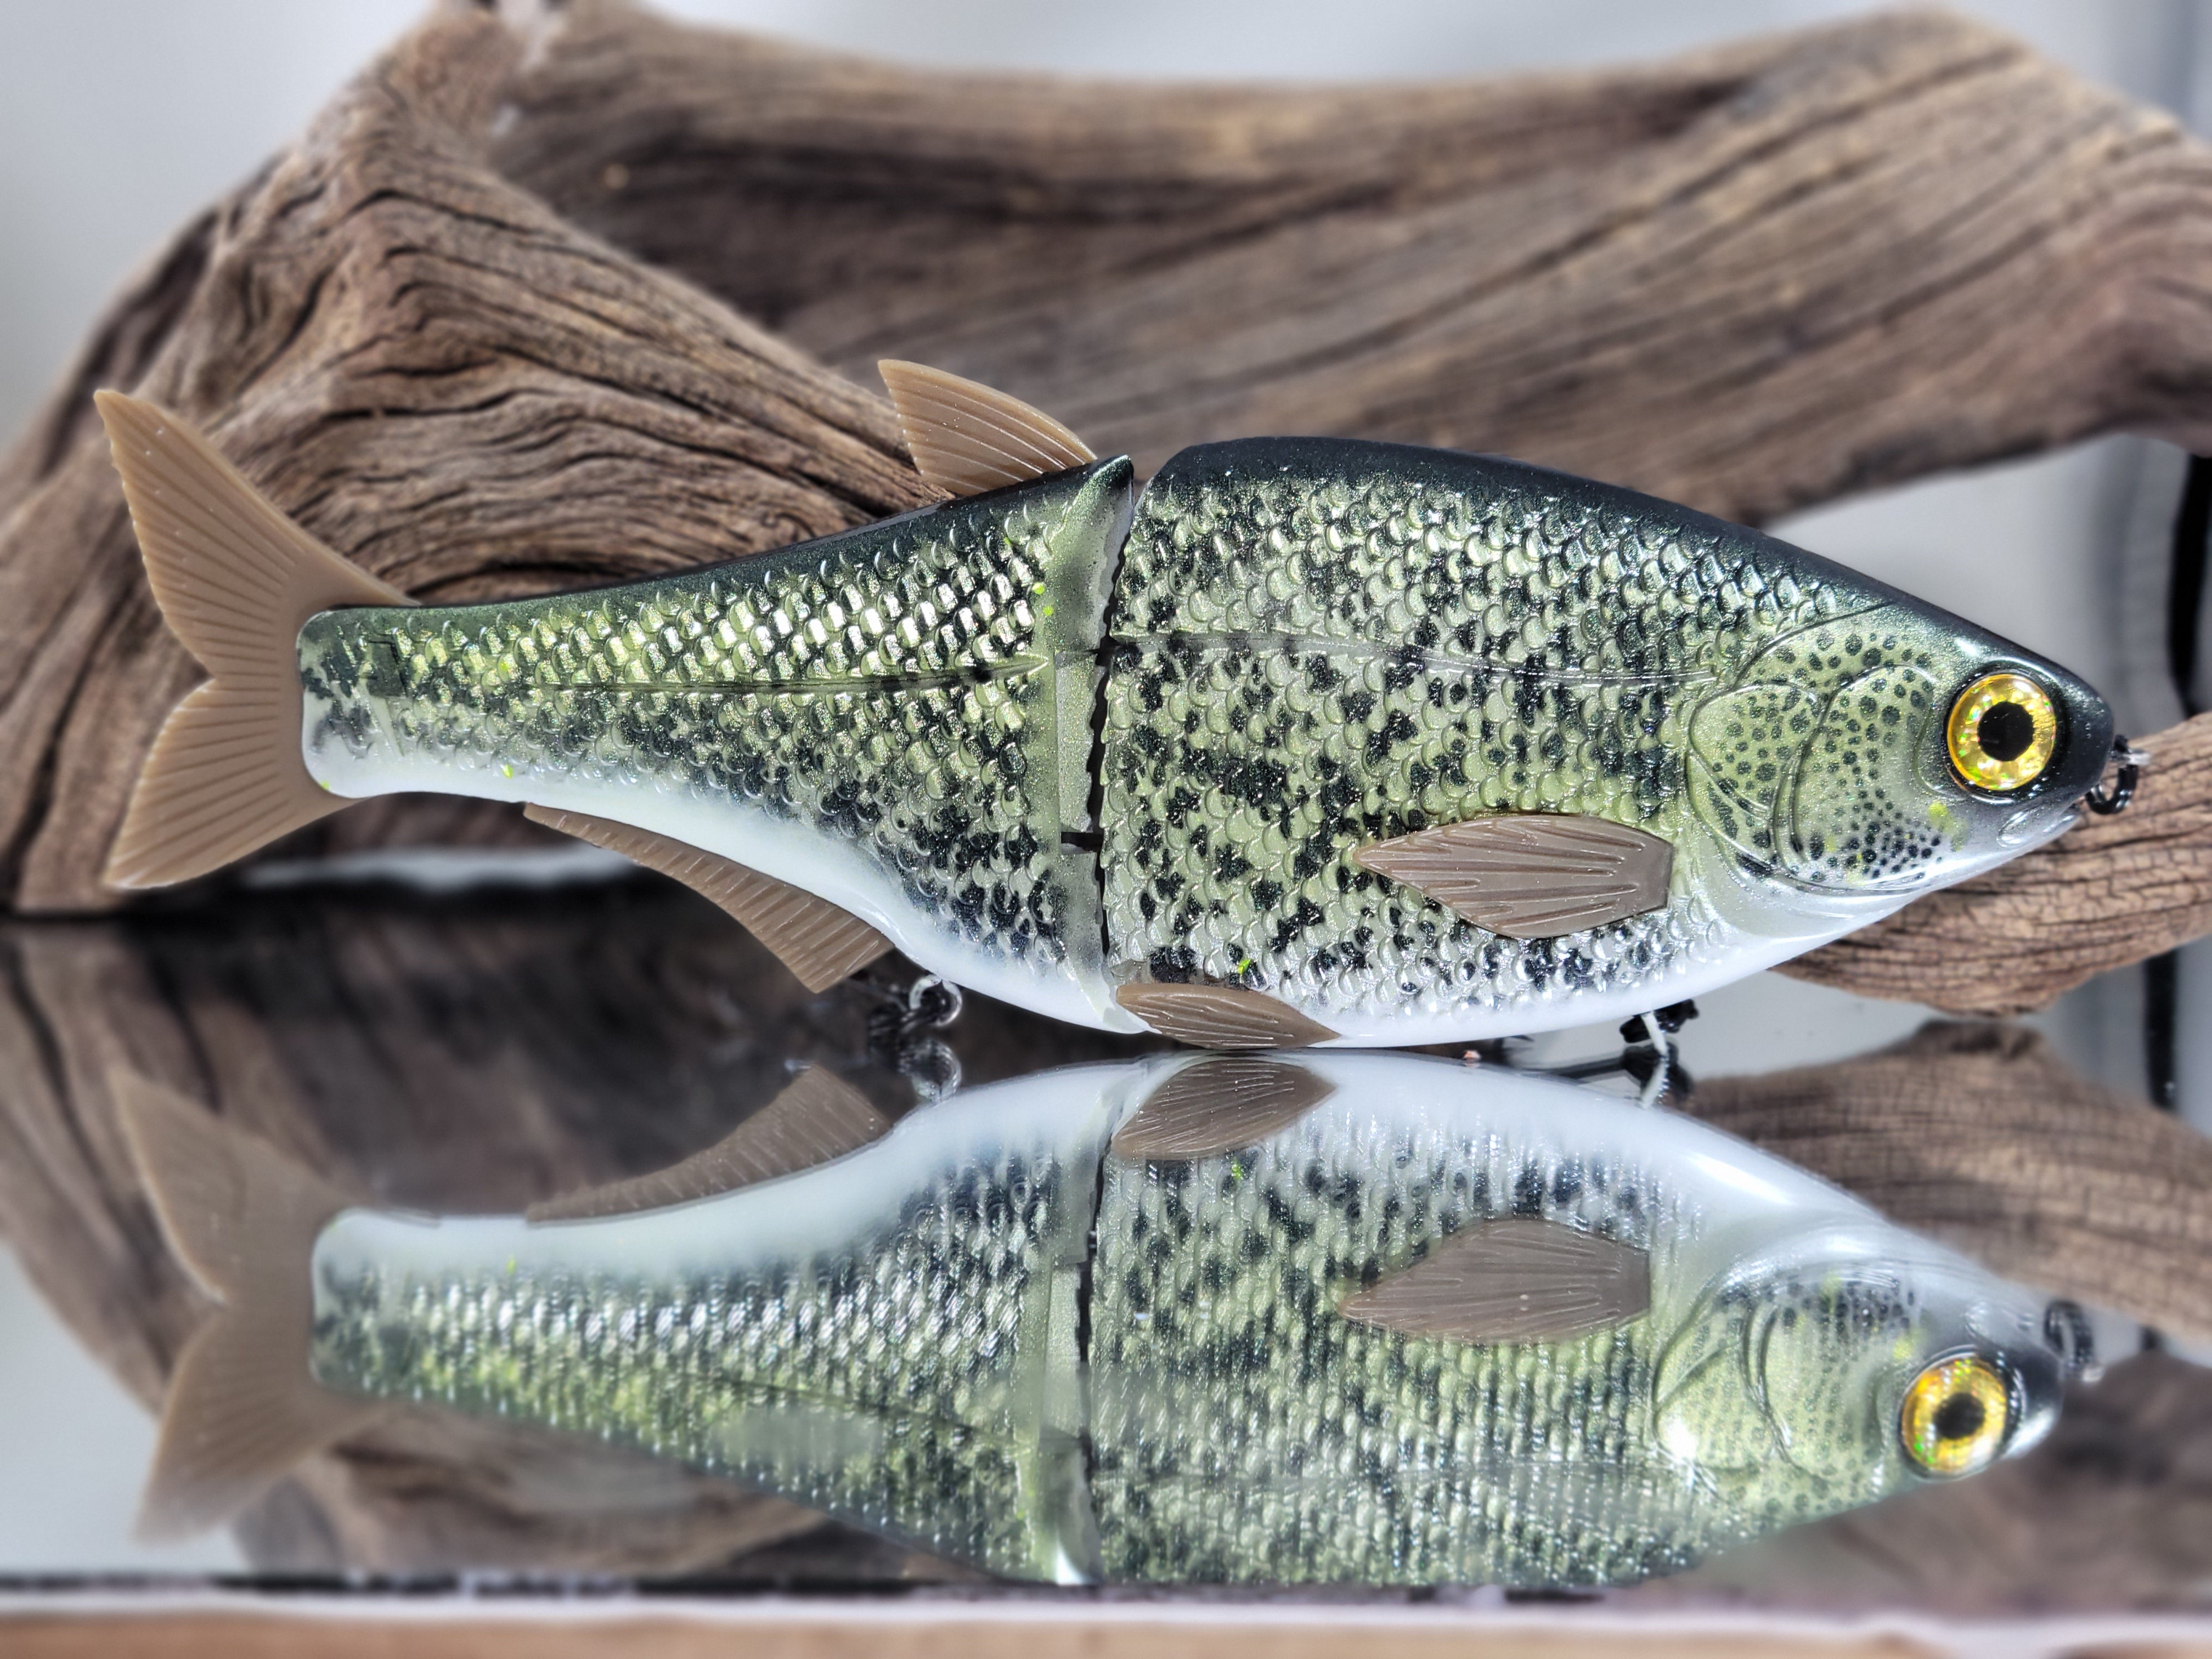 Hinkle Shad Style - Black Crappie